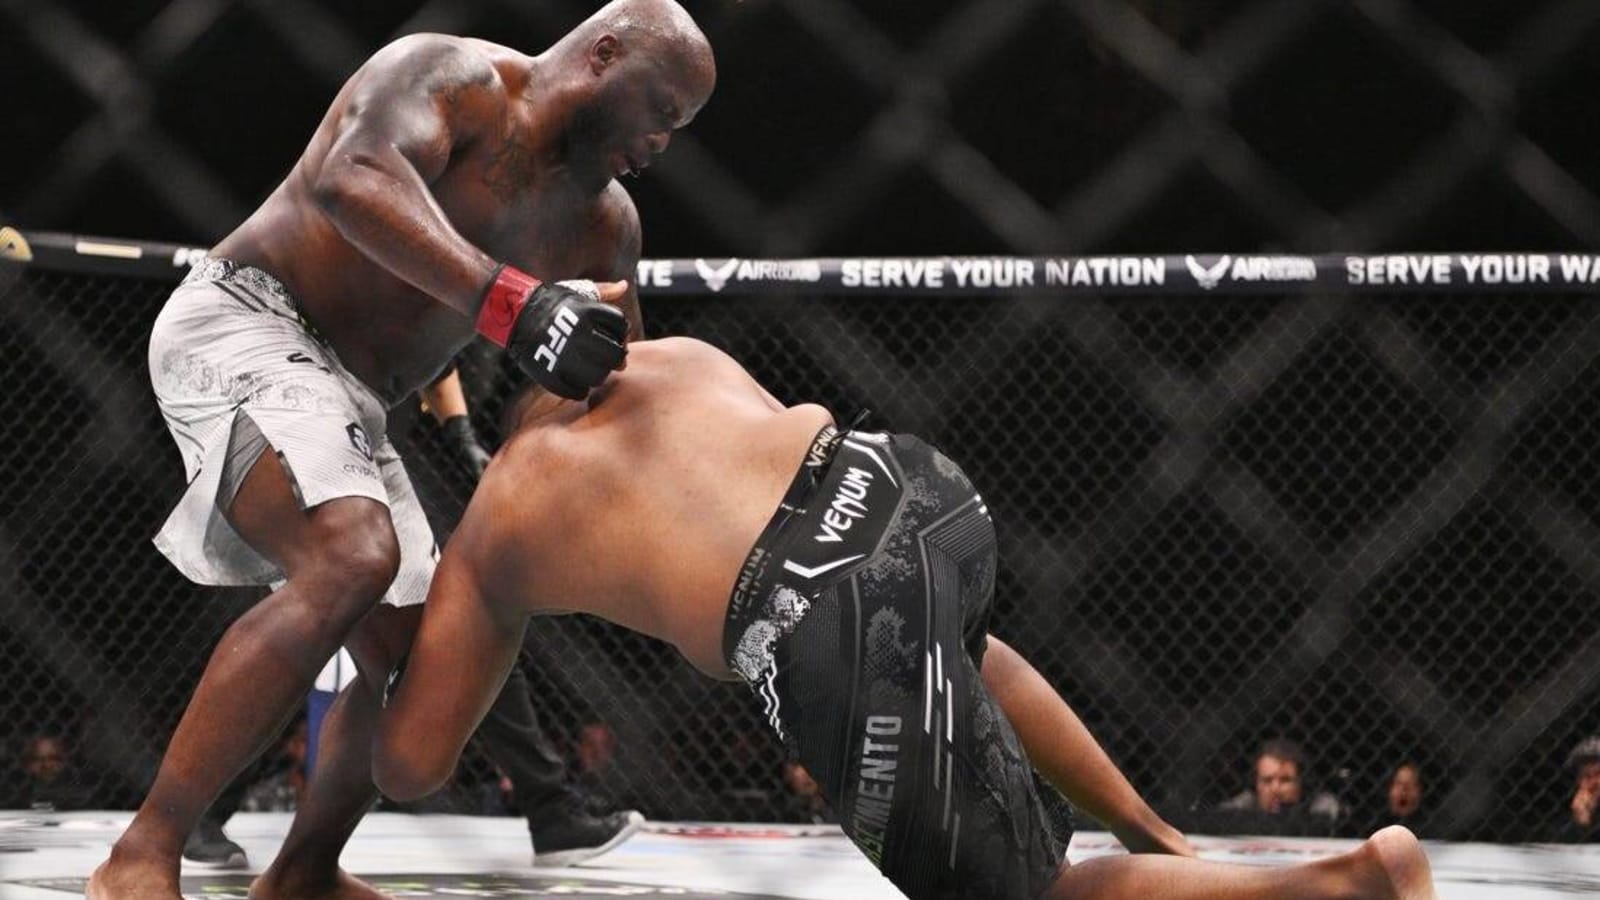 Derrick Lewis whoops it up after stopping Rodrigo Nascimento